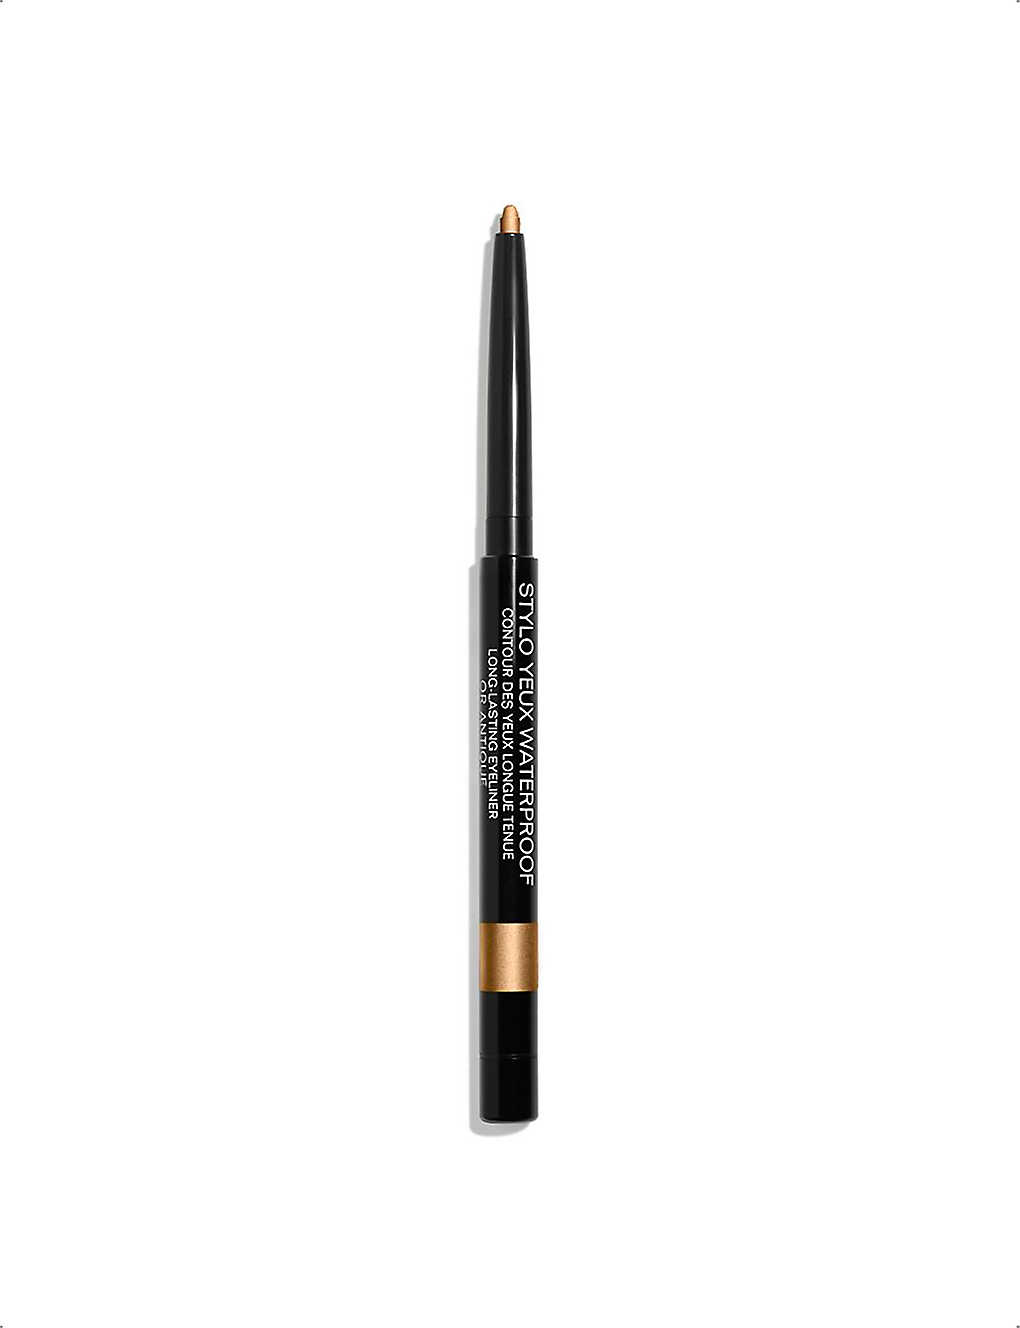 Chanel Or Antique Stylo Yeux Waterproof Long-lasting Eyeliner 0.3g